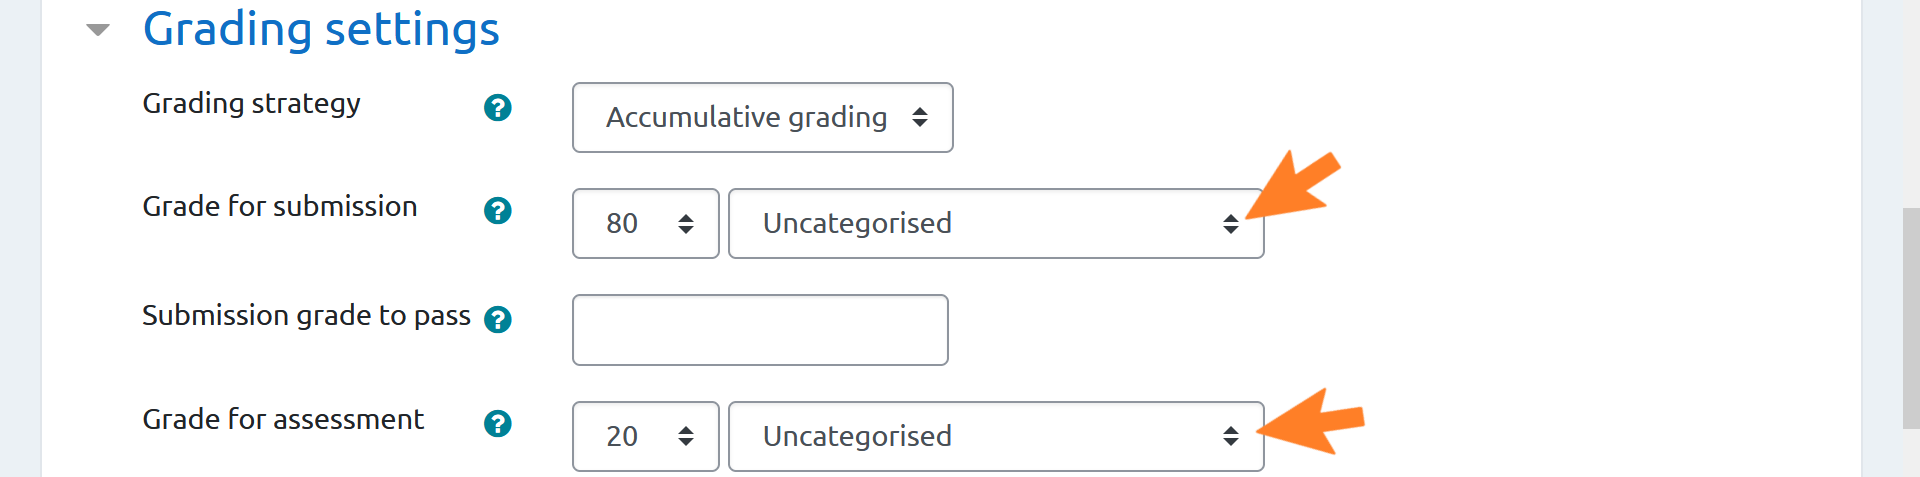 An image of the grading settings sub-menu, with orange arrows indicating the toggle options buttons beside 'Grade for submission' and 'Grade for assessment'.